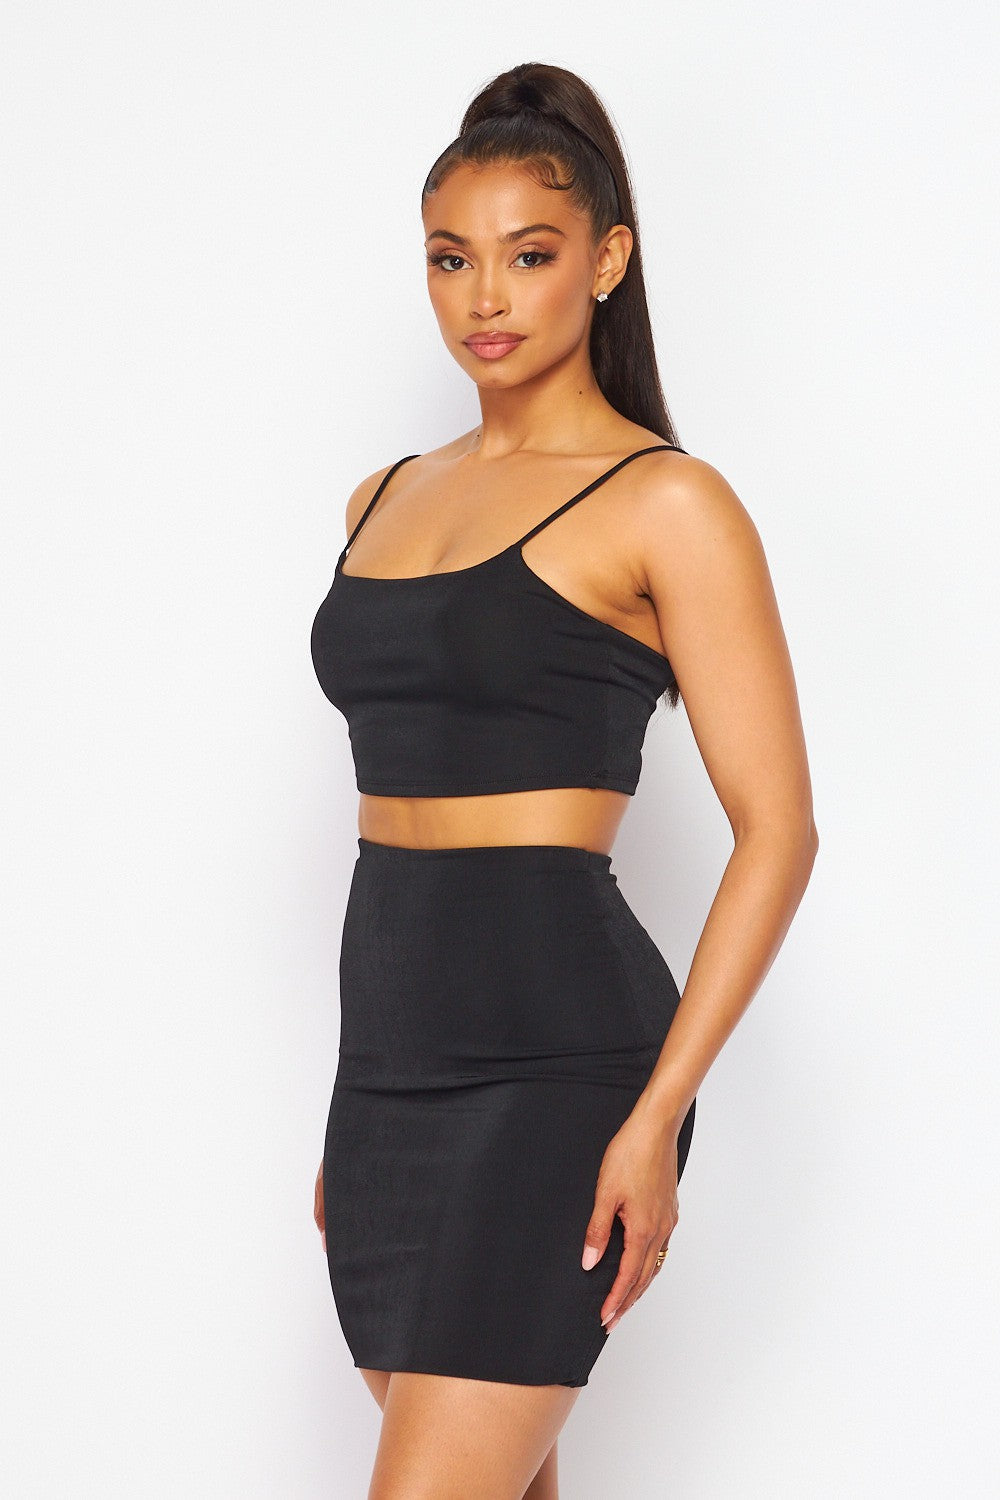 Made For you Basic Bodycon Crop Top Mini Skirt Set